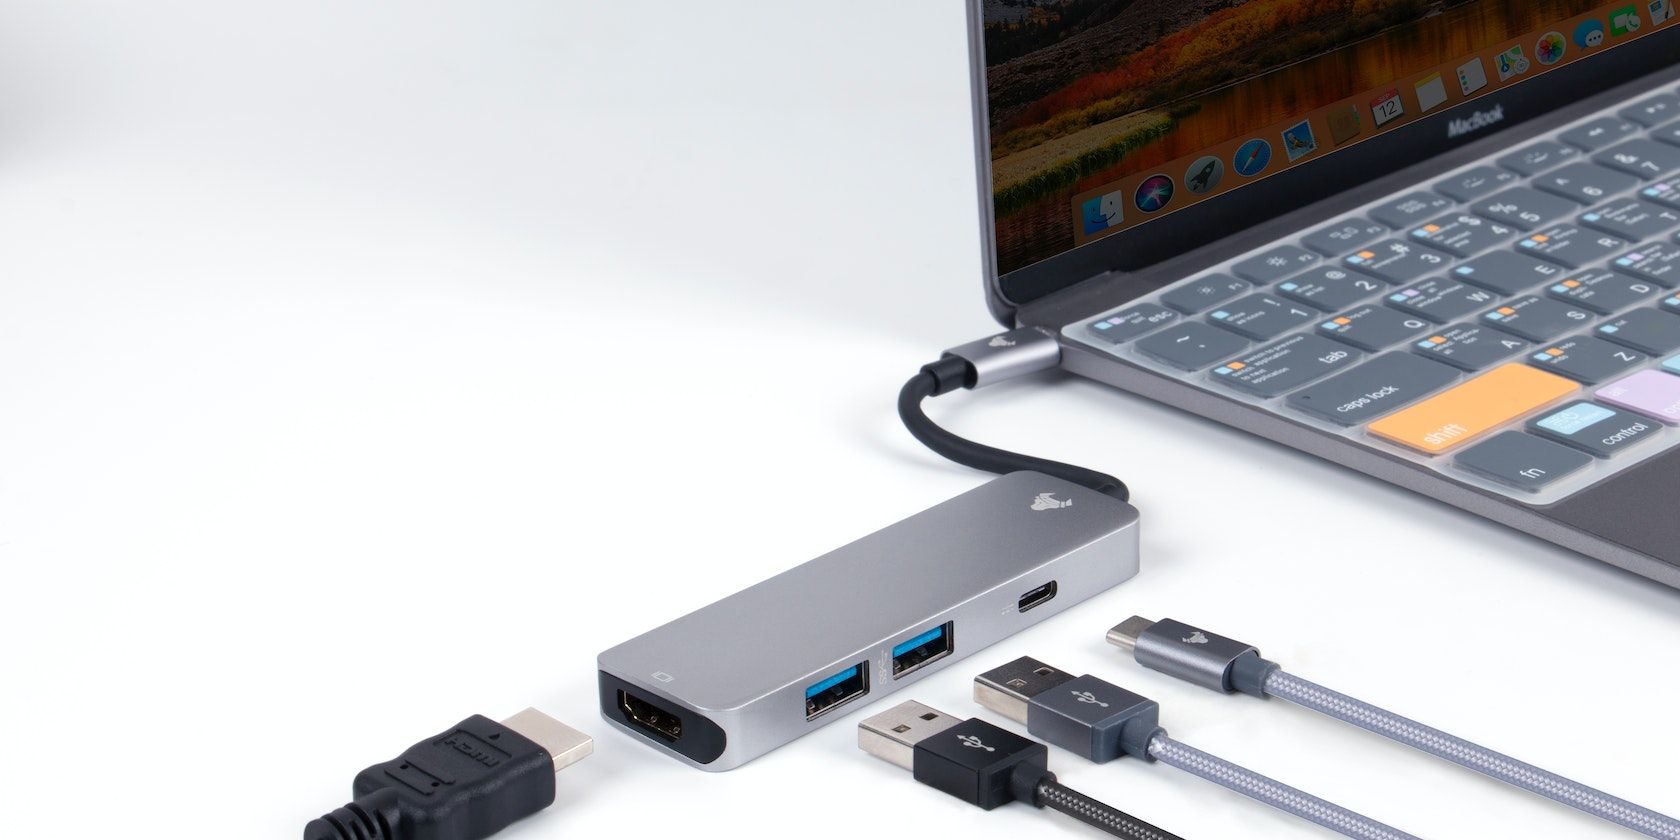 MacBook with external USB port device